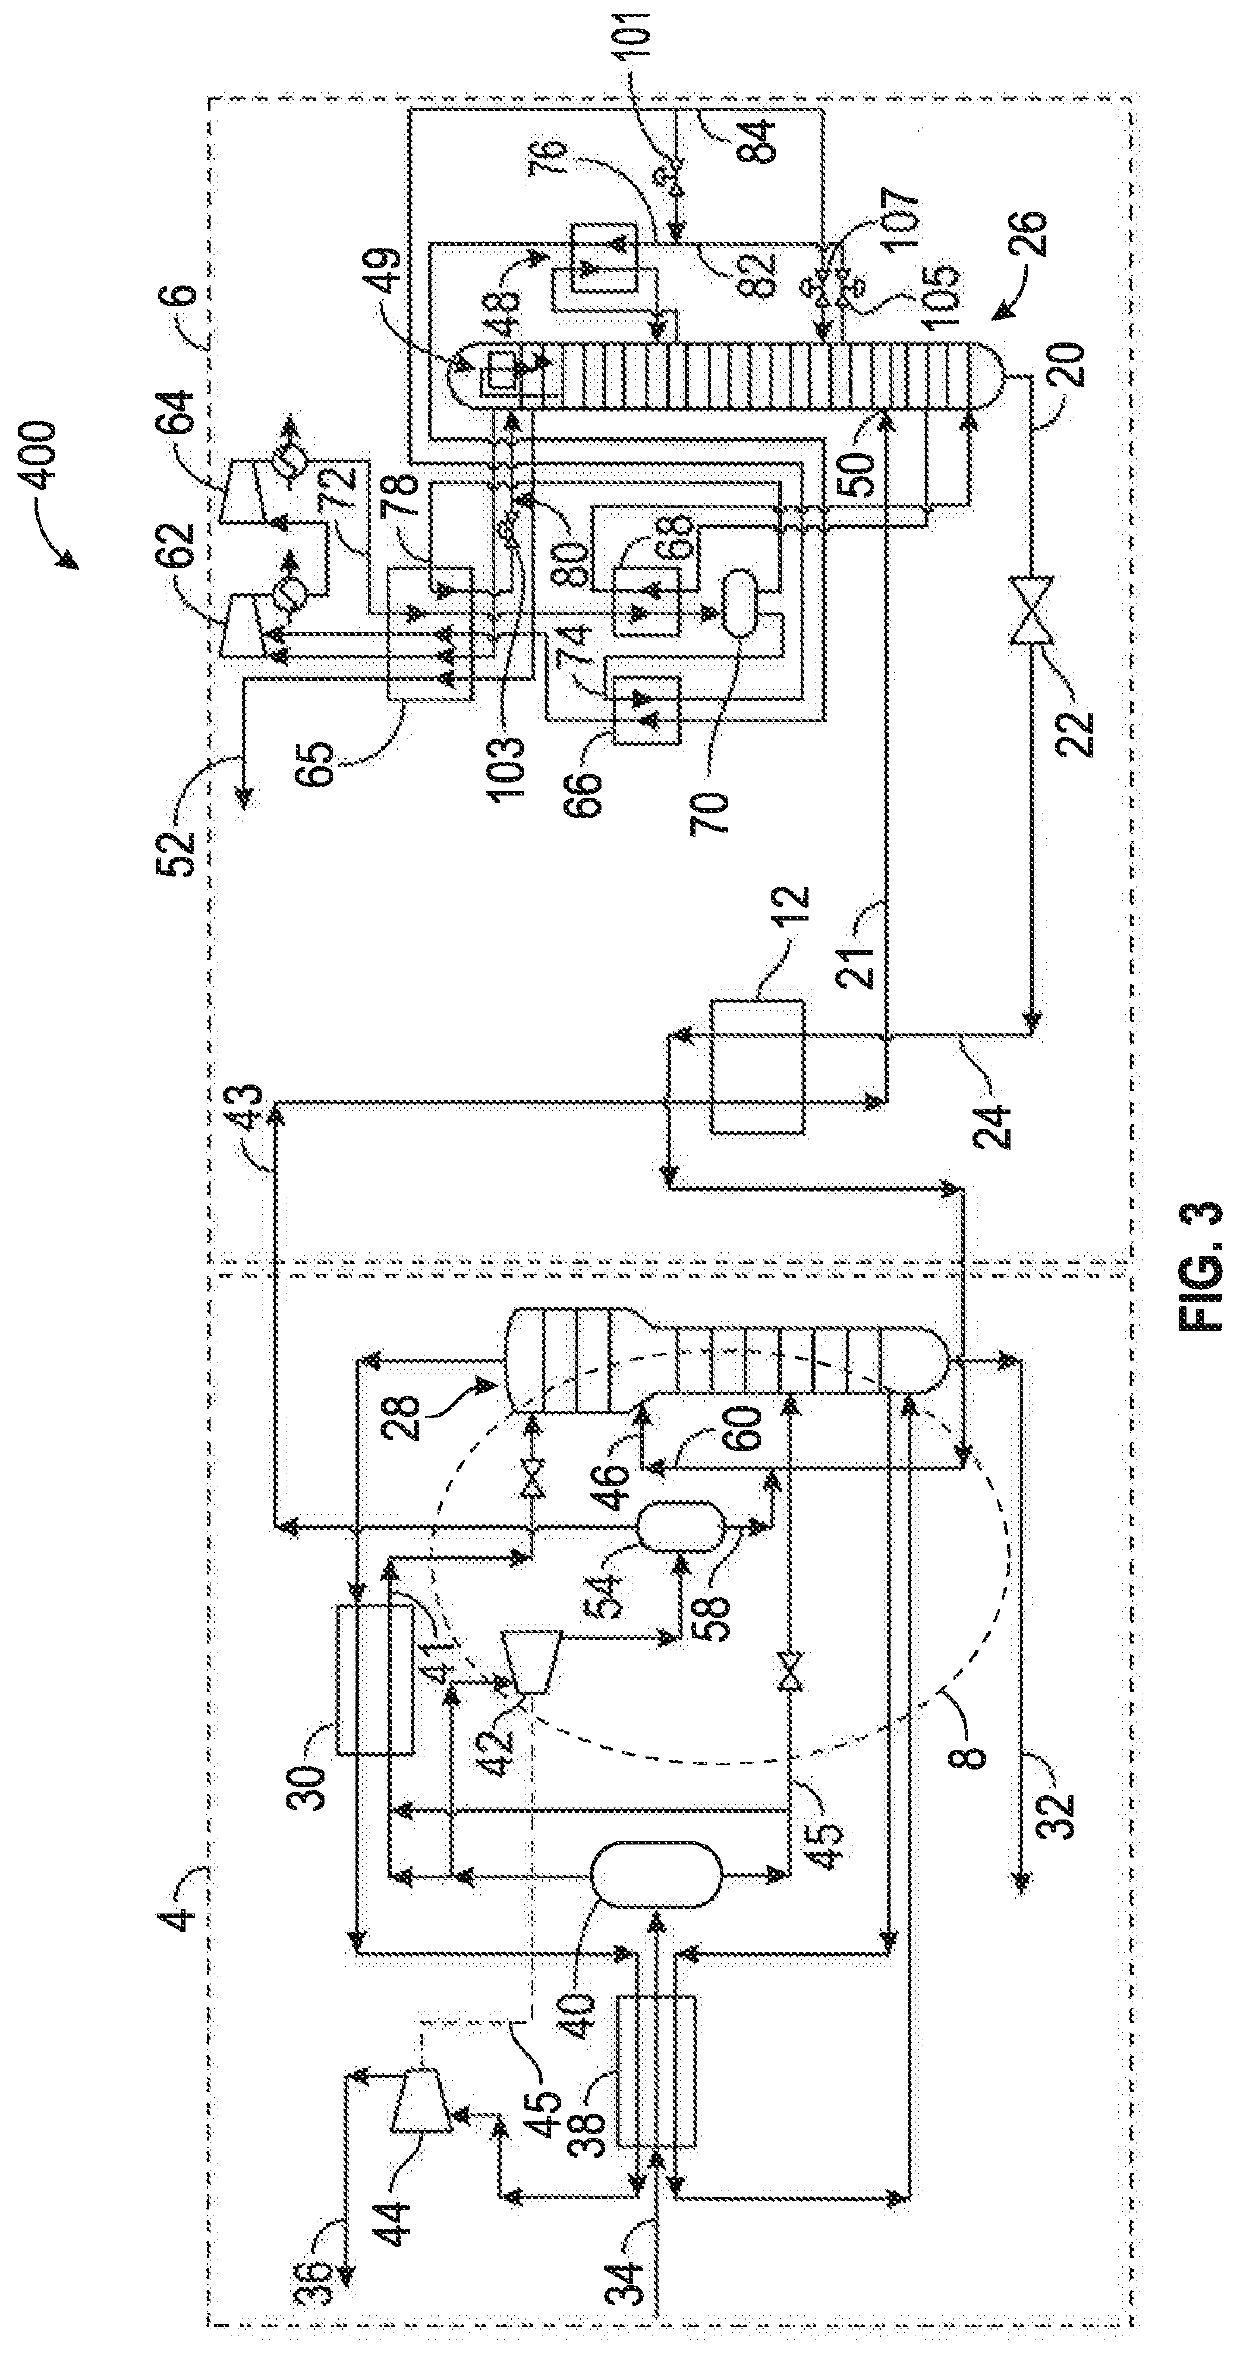 Methods and systems for removing nitrogen from natural gas